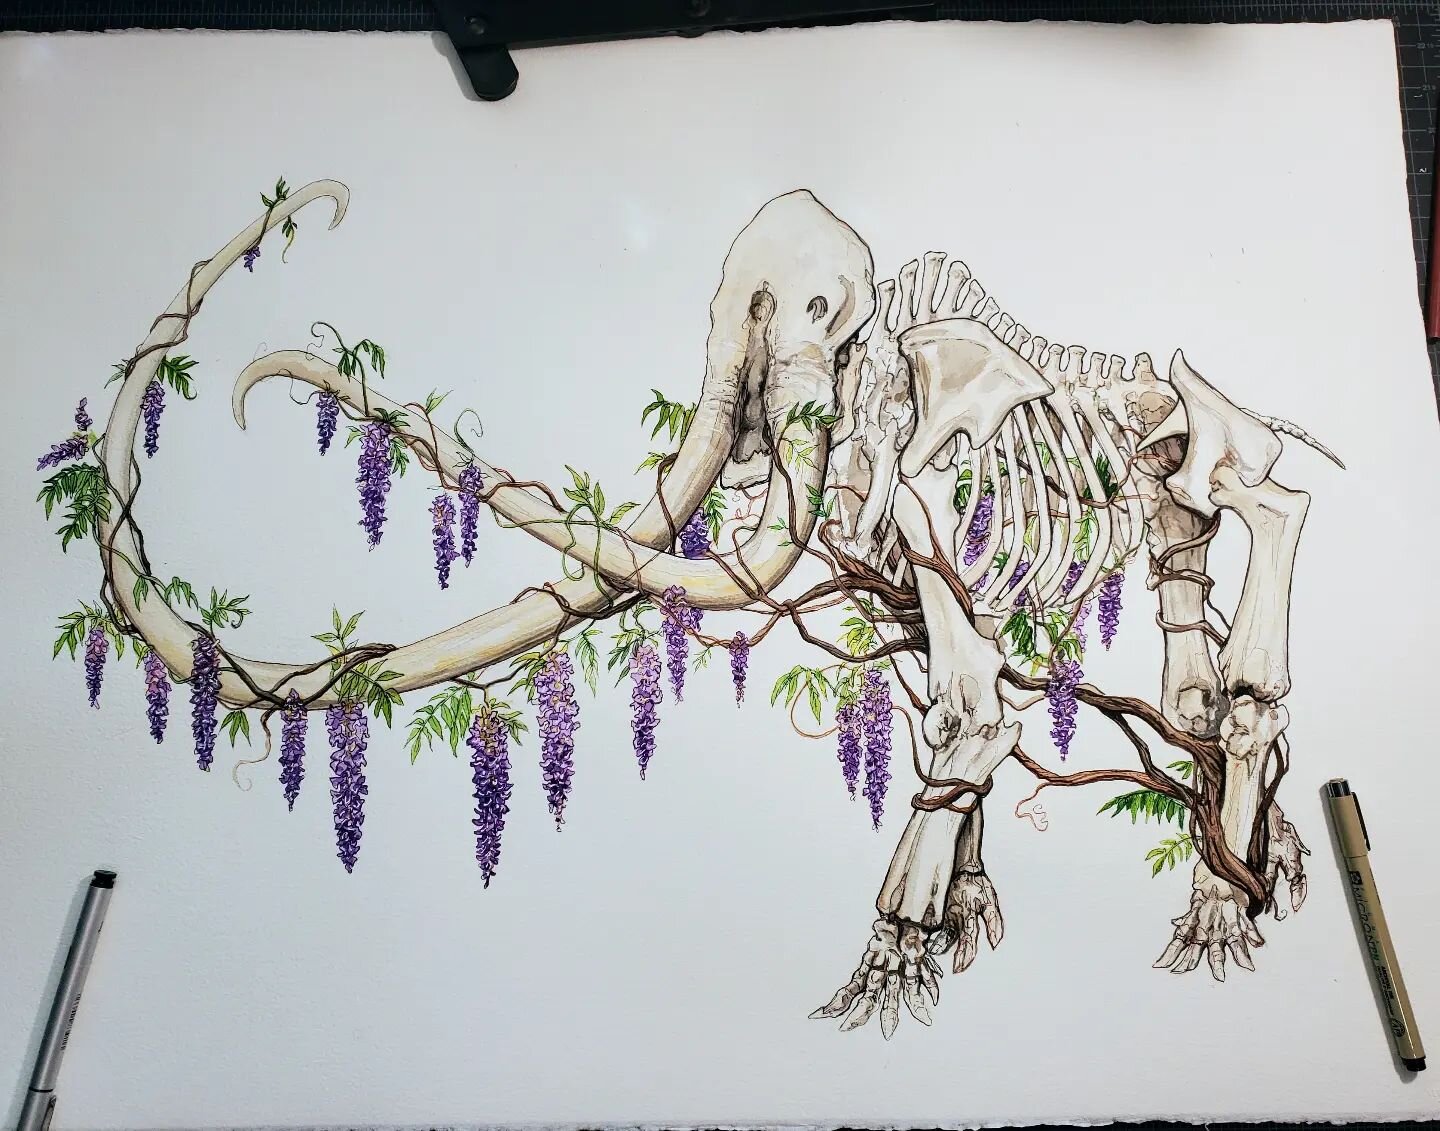 Working on another skeleton today! I have so many I want to work on that it's starting to stress me out 😬

#mastadon #woolymammoth #skeletonart #botanicalart #flowers #wysteria #prehistoric #prehistoricart #illustration #Inkart #watercolor #penandin